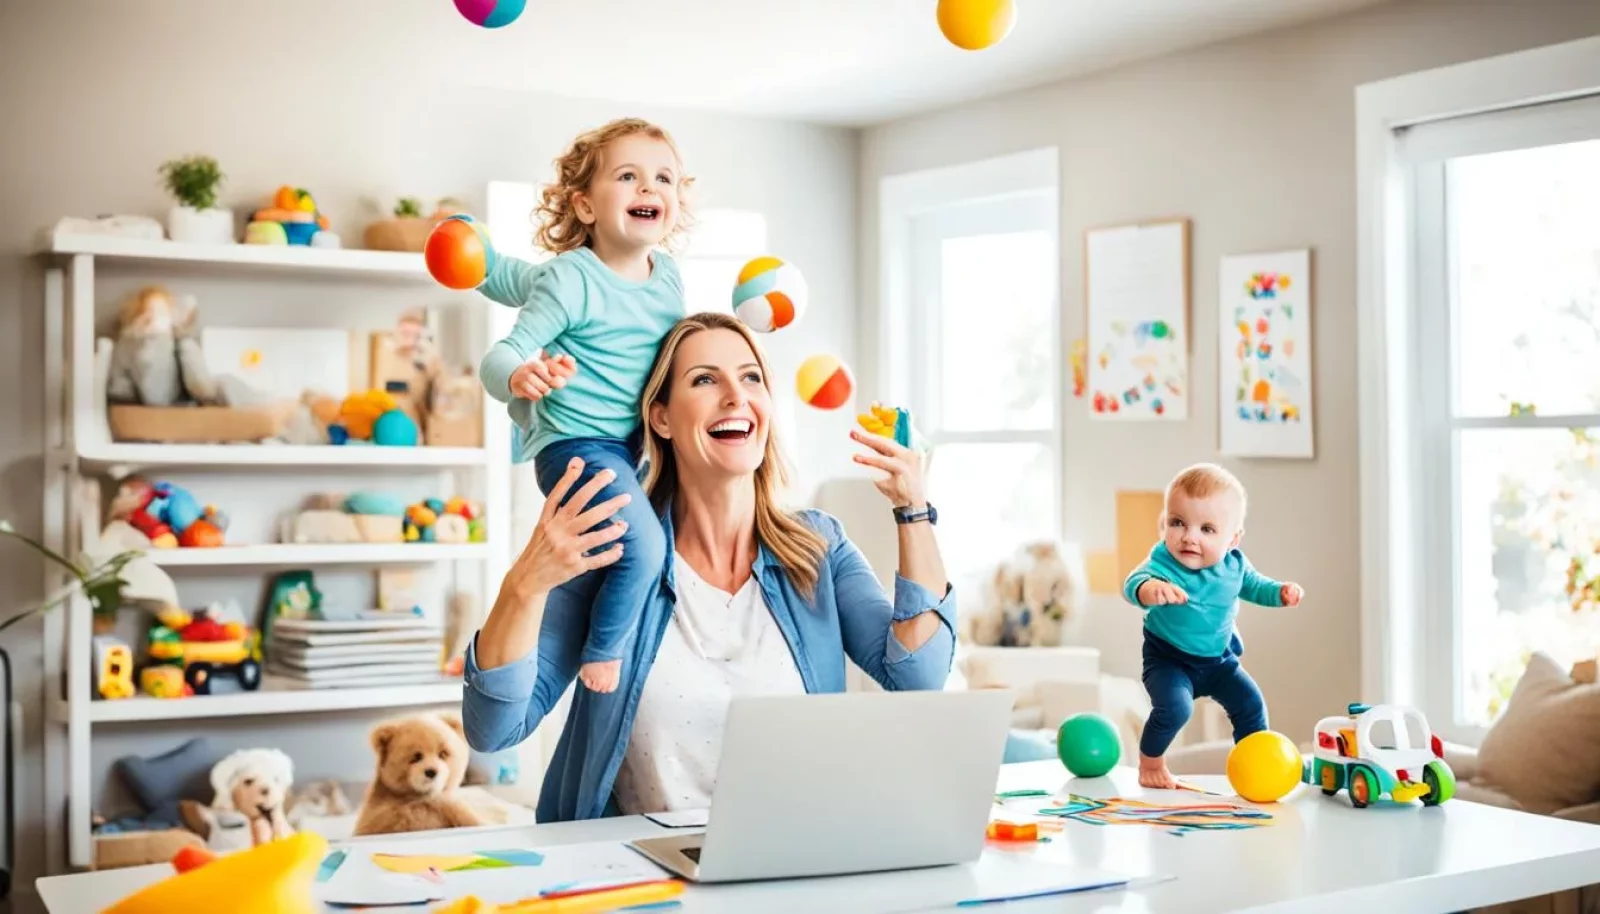 How To Grow A Big Business Fast As A Full Time Mom With Busy Kids